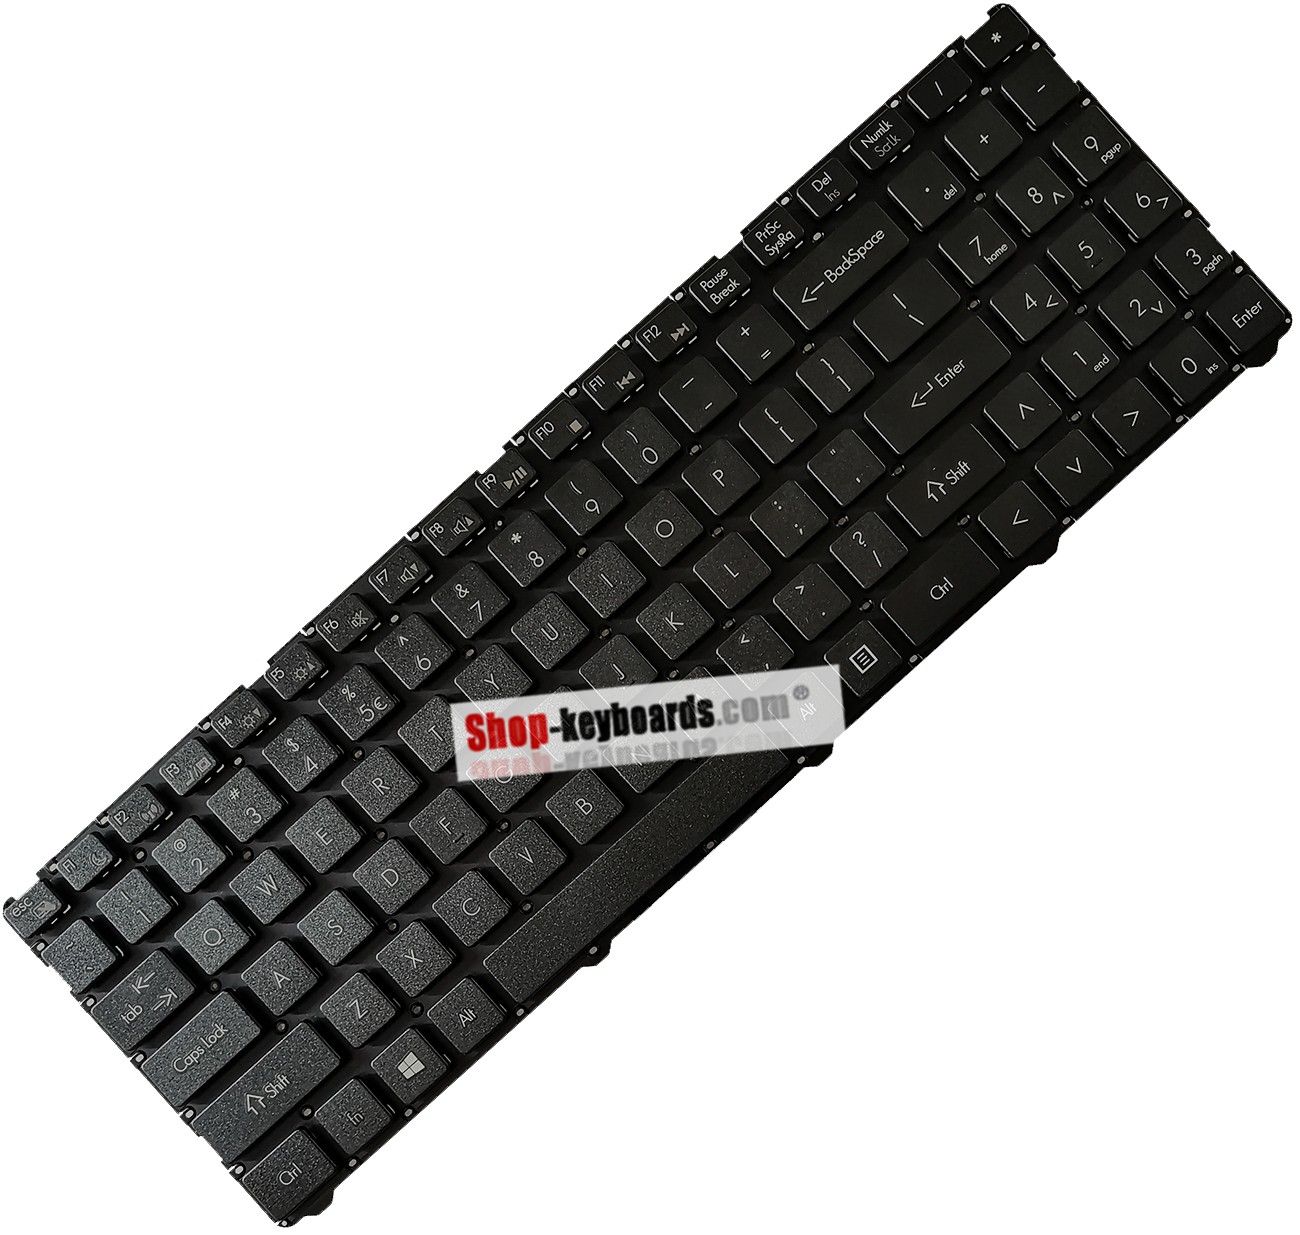 LG MP-12K73D0-9207 Keyboard replacement